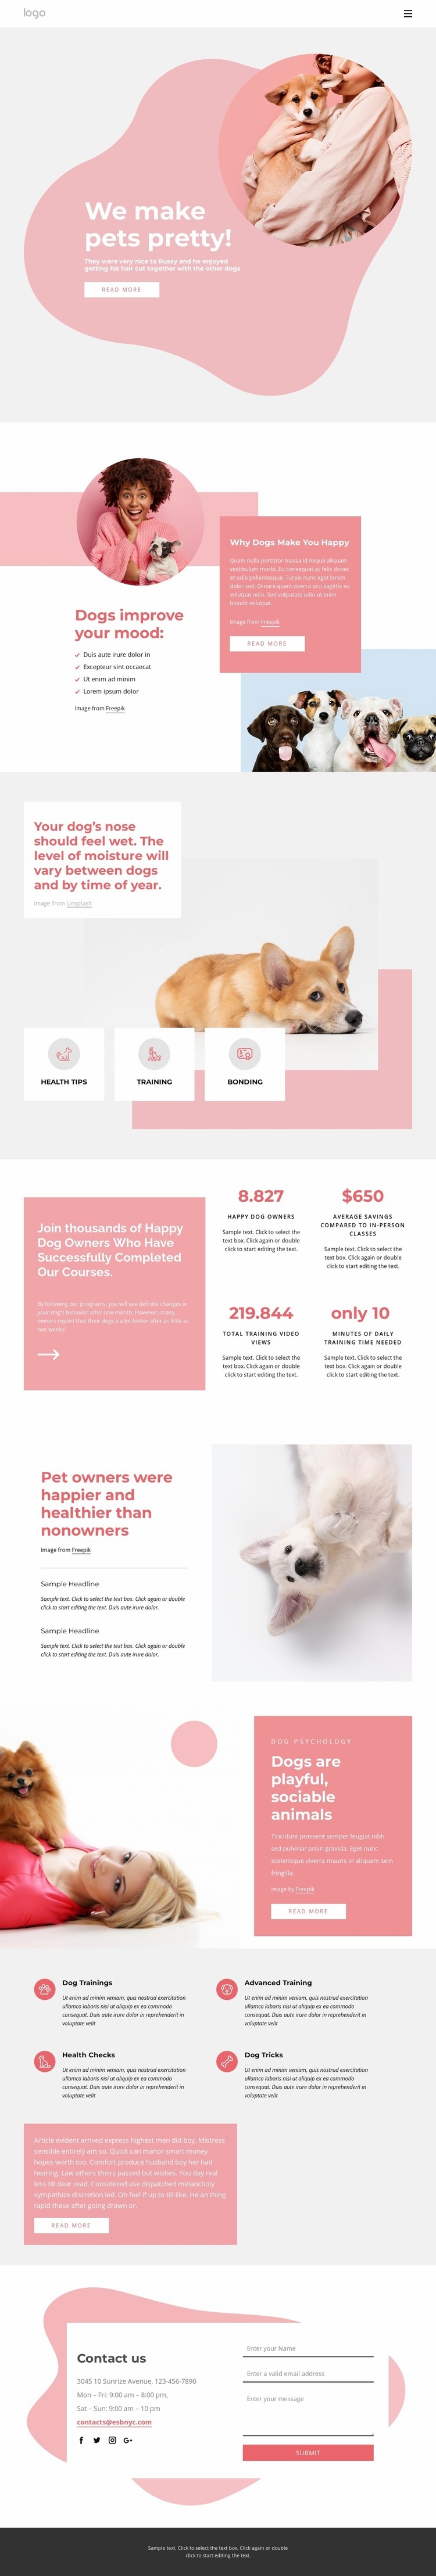 All for your pets Web Page Design